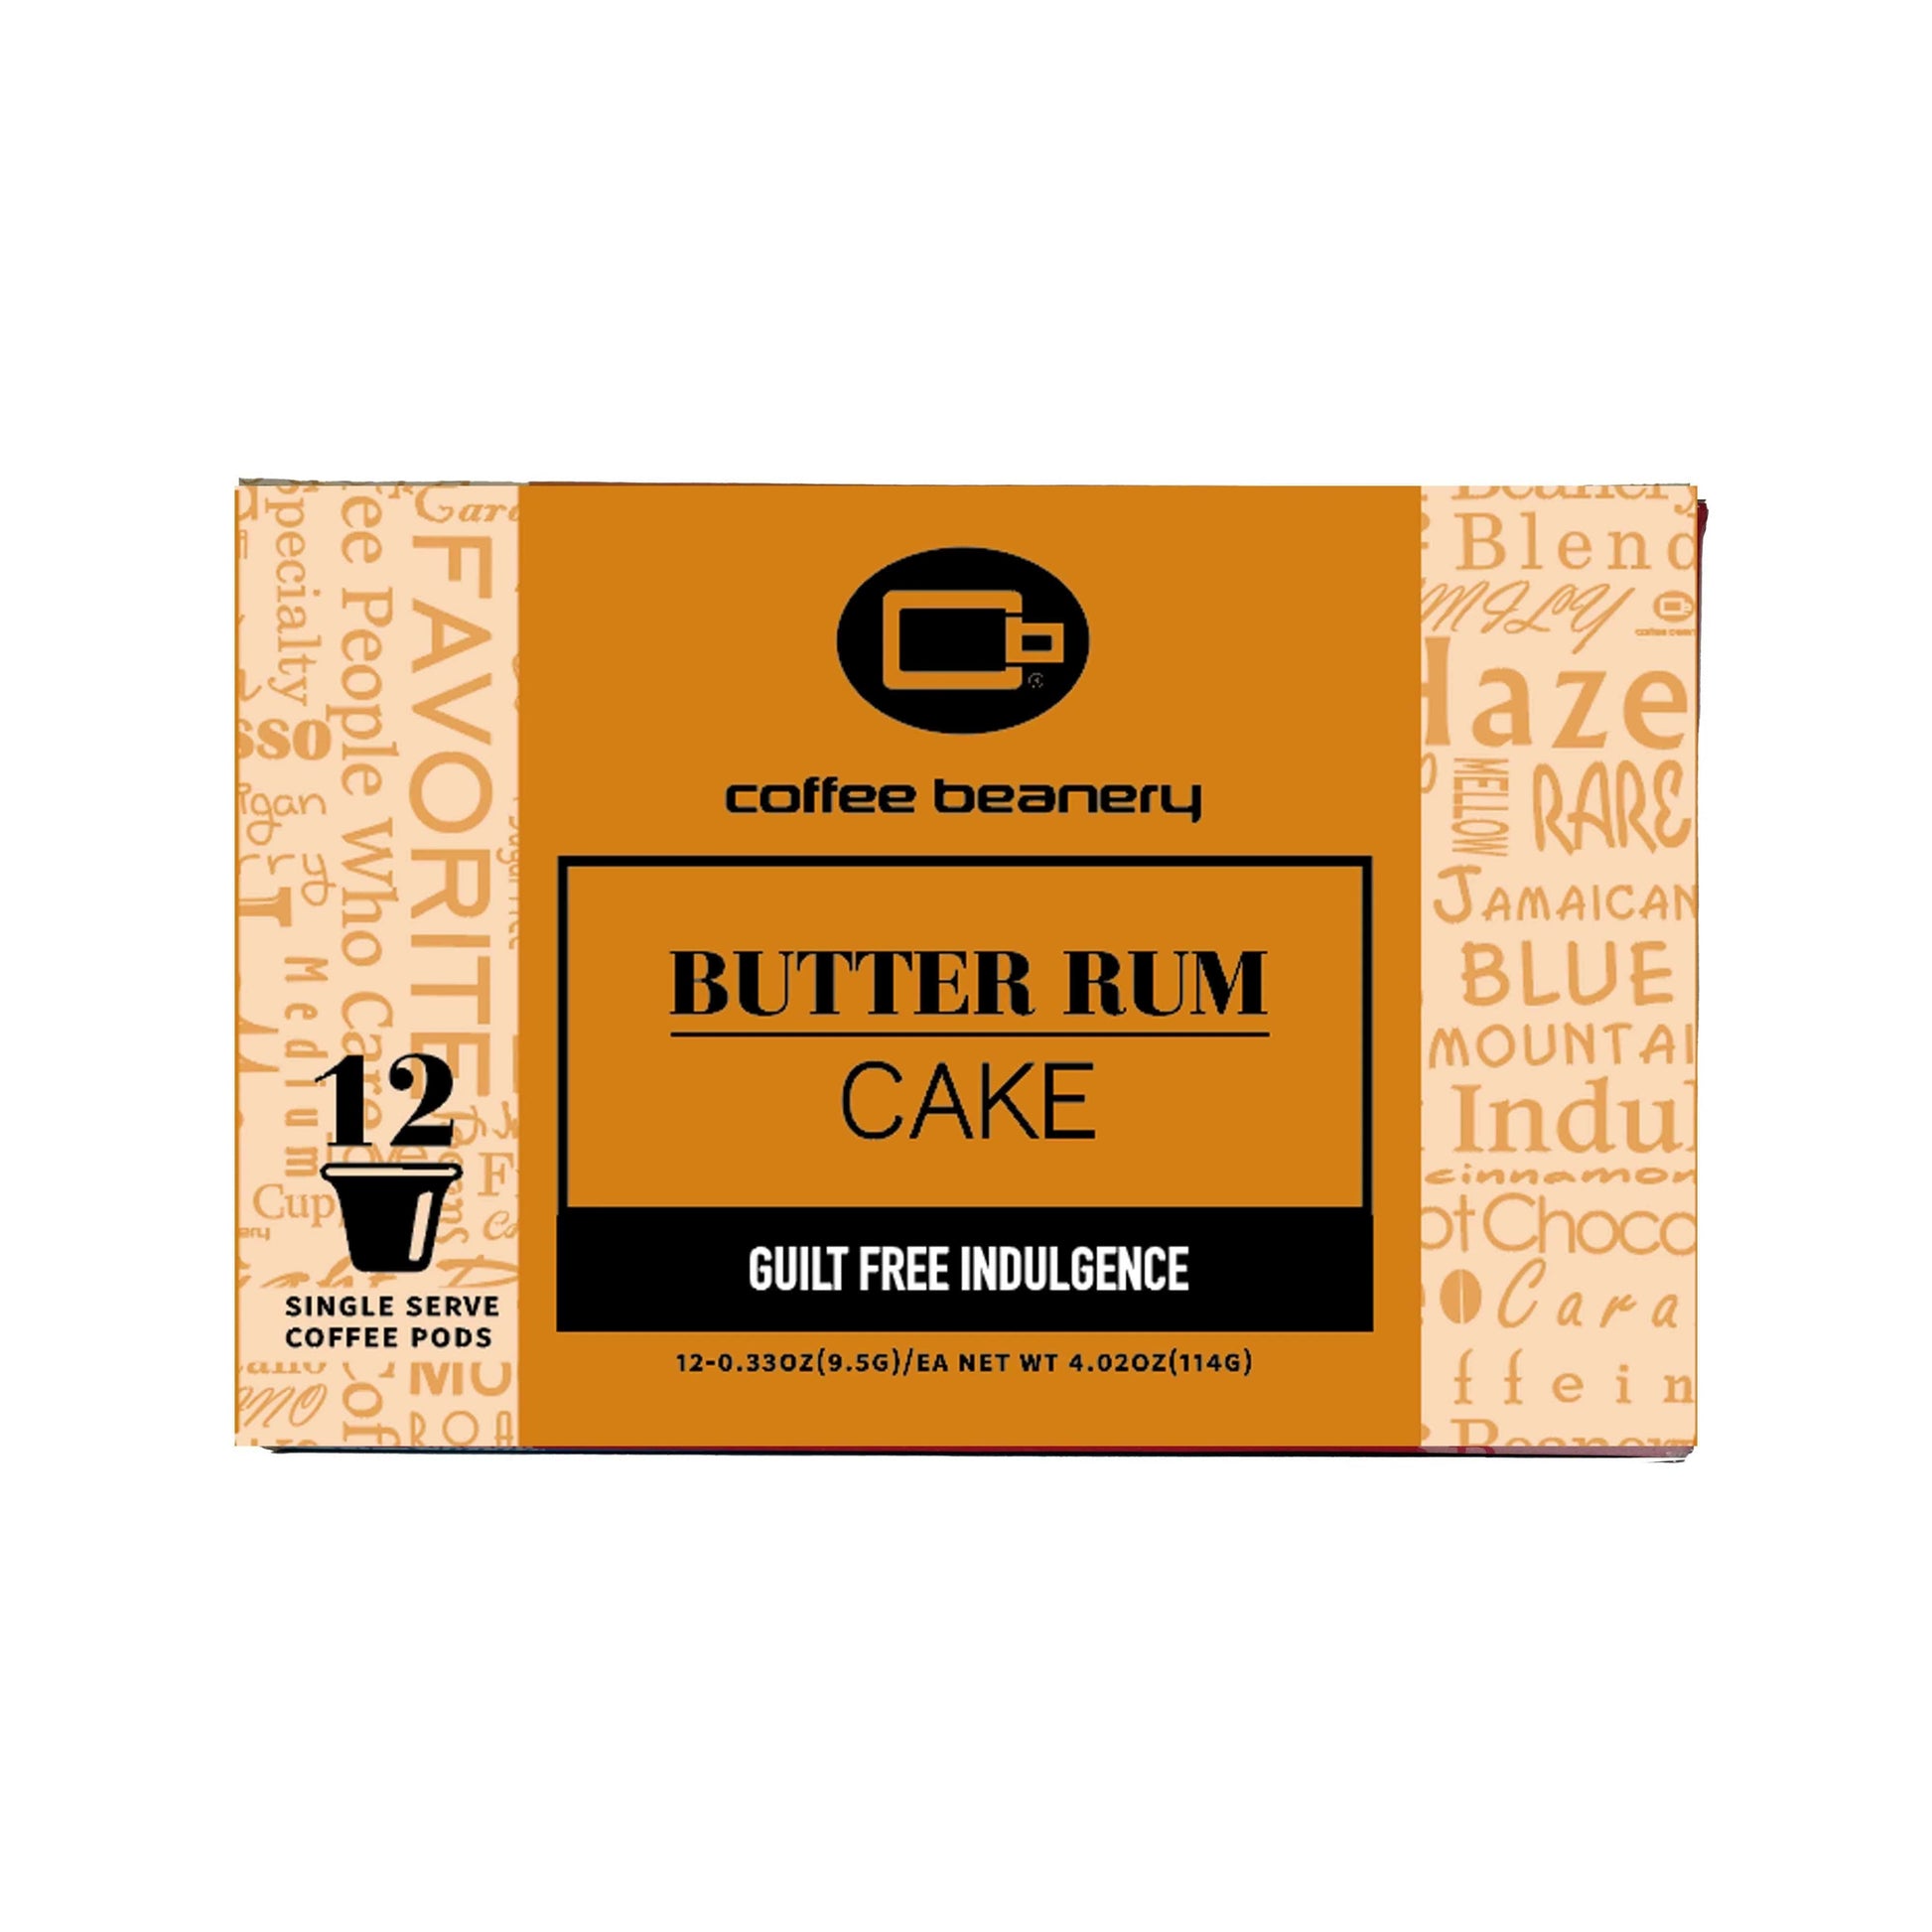 Coffee Beanery Flavored Coffee Regular / 12ct Pods / Automatic Drip Butter Rum Cake Flavored Coffee